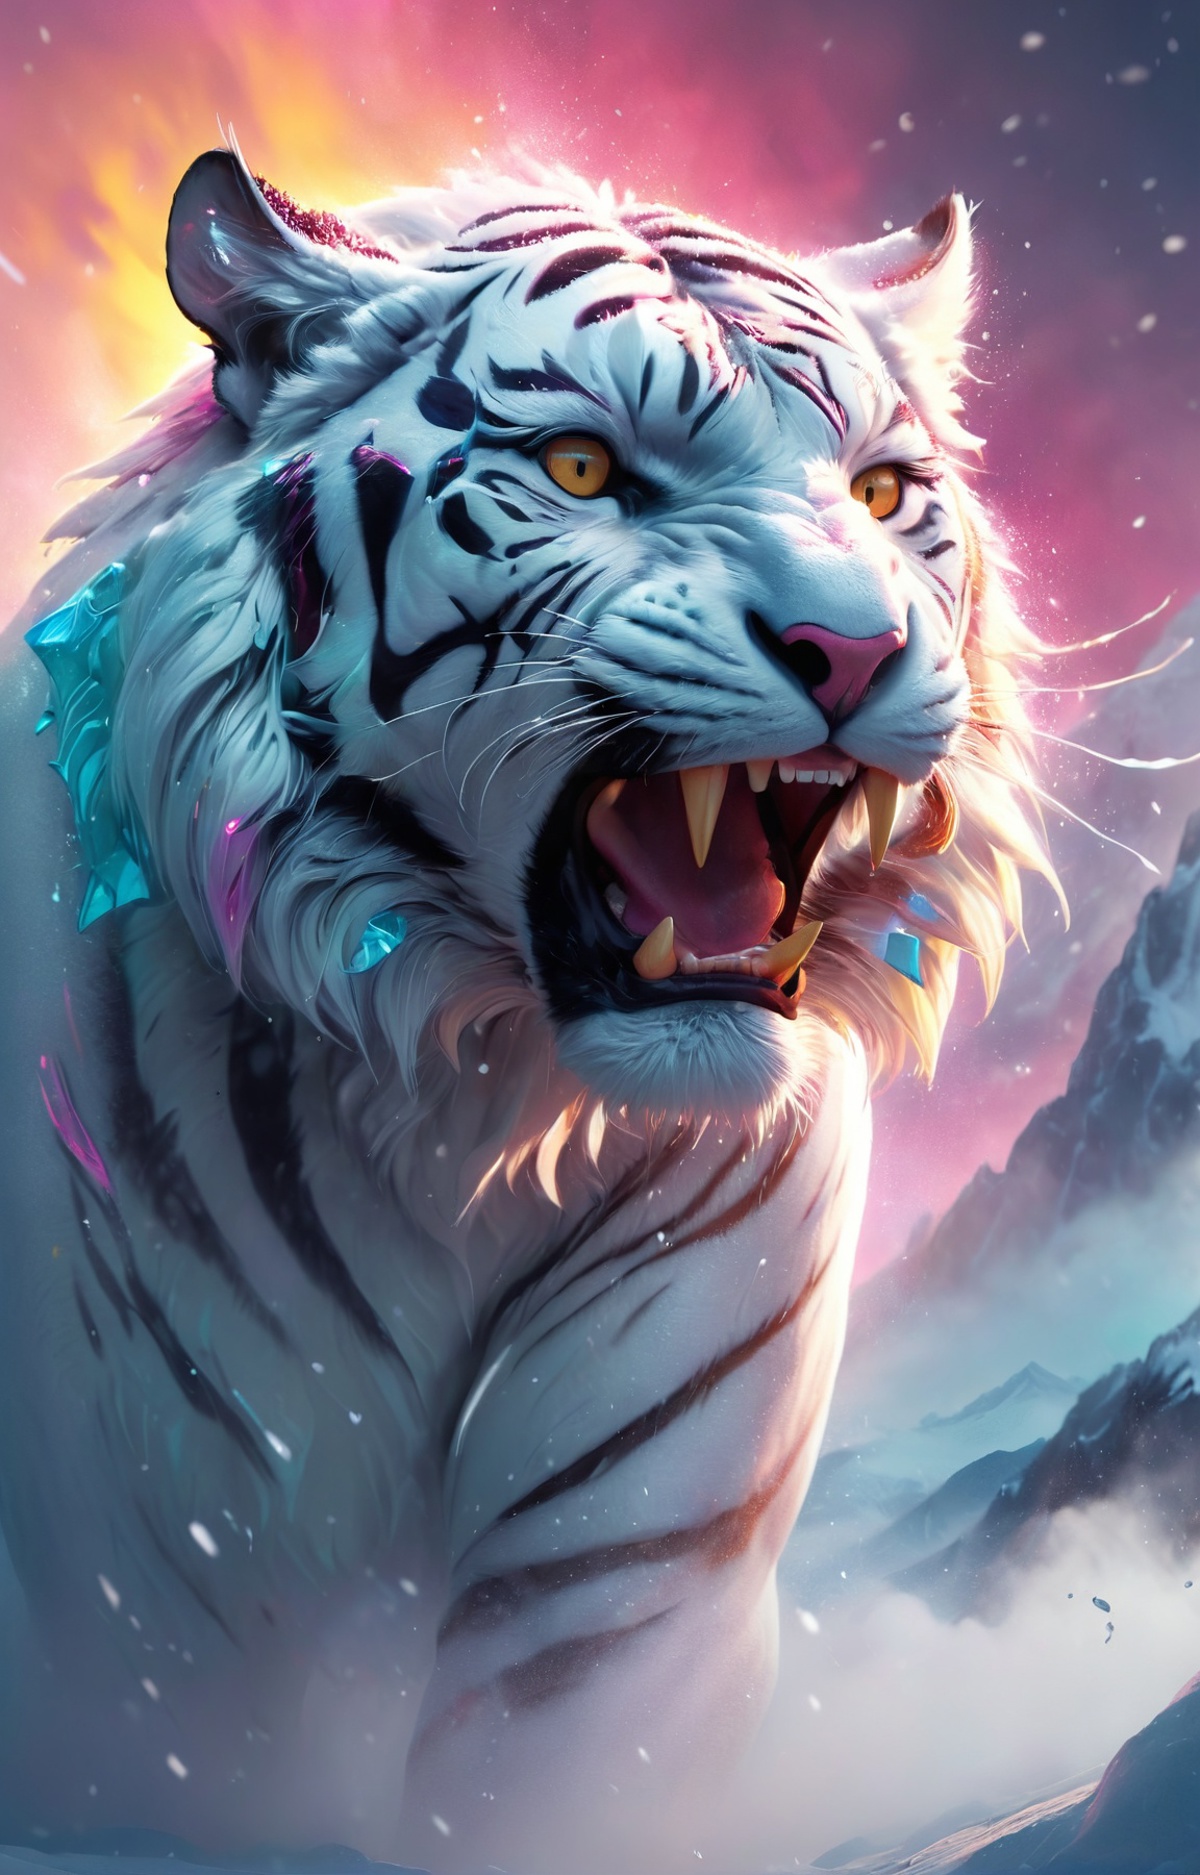 A vicious looking tiger with yellow eyes, white and black fur, and sharp teeth.